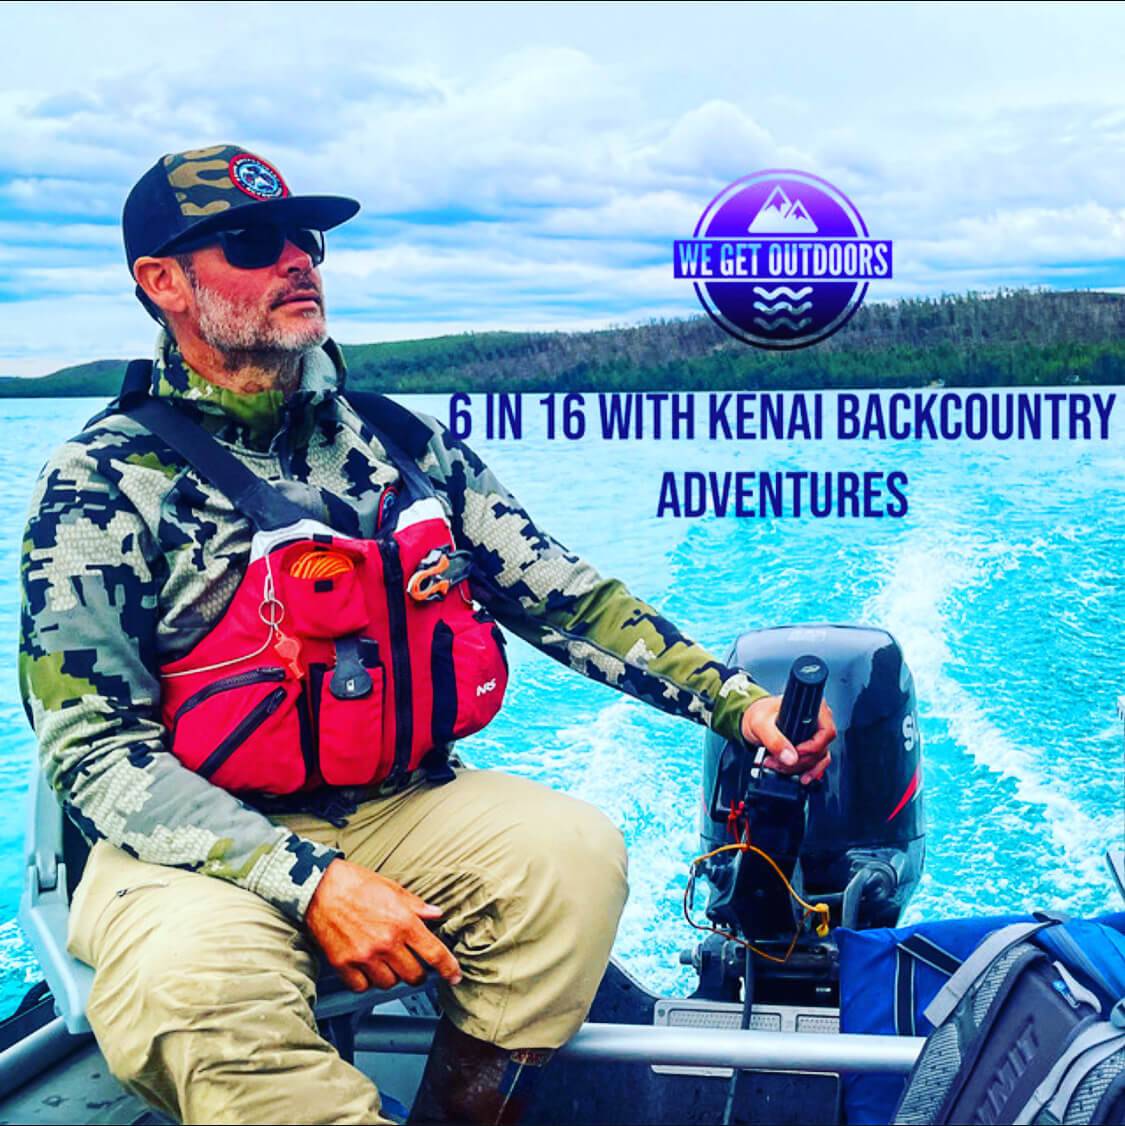 Explore the Most Breathtaking Backcountry Areas Alaska has to Offer with Kenai Backcountry Adventures